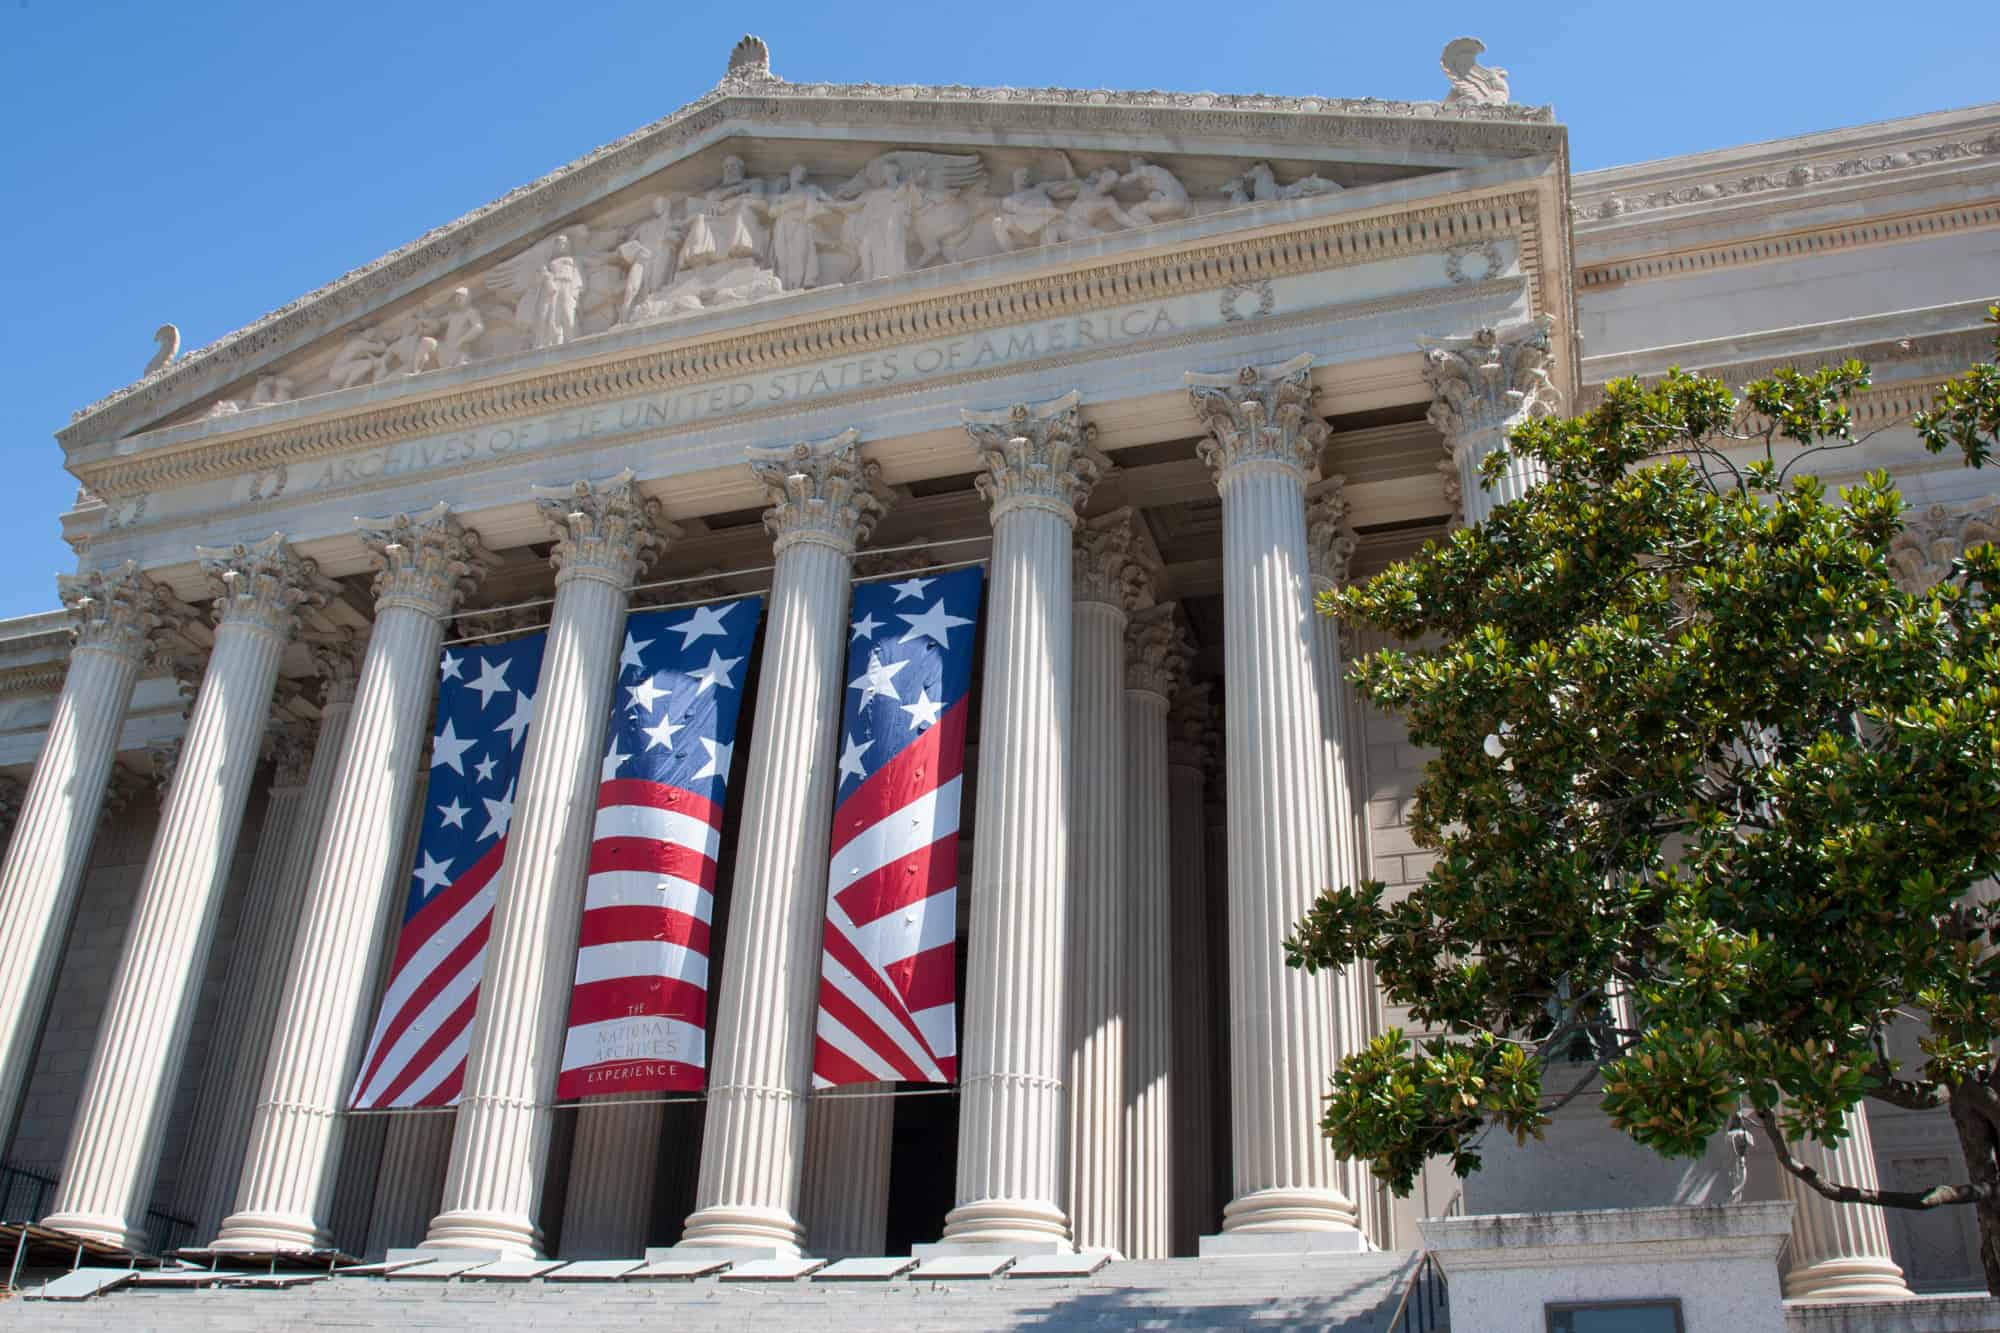 archives of the USA located in washington dc with long banners out front that represent the american flag, is seattle in washington dc is a common misconception but washington dc is the political center of the US while Seattle is a more vibrant, carefree city